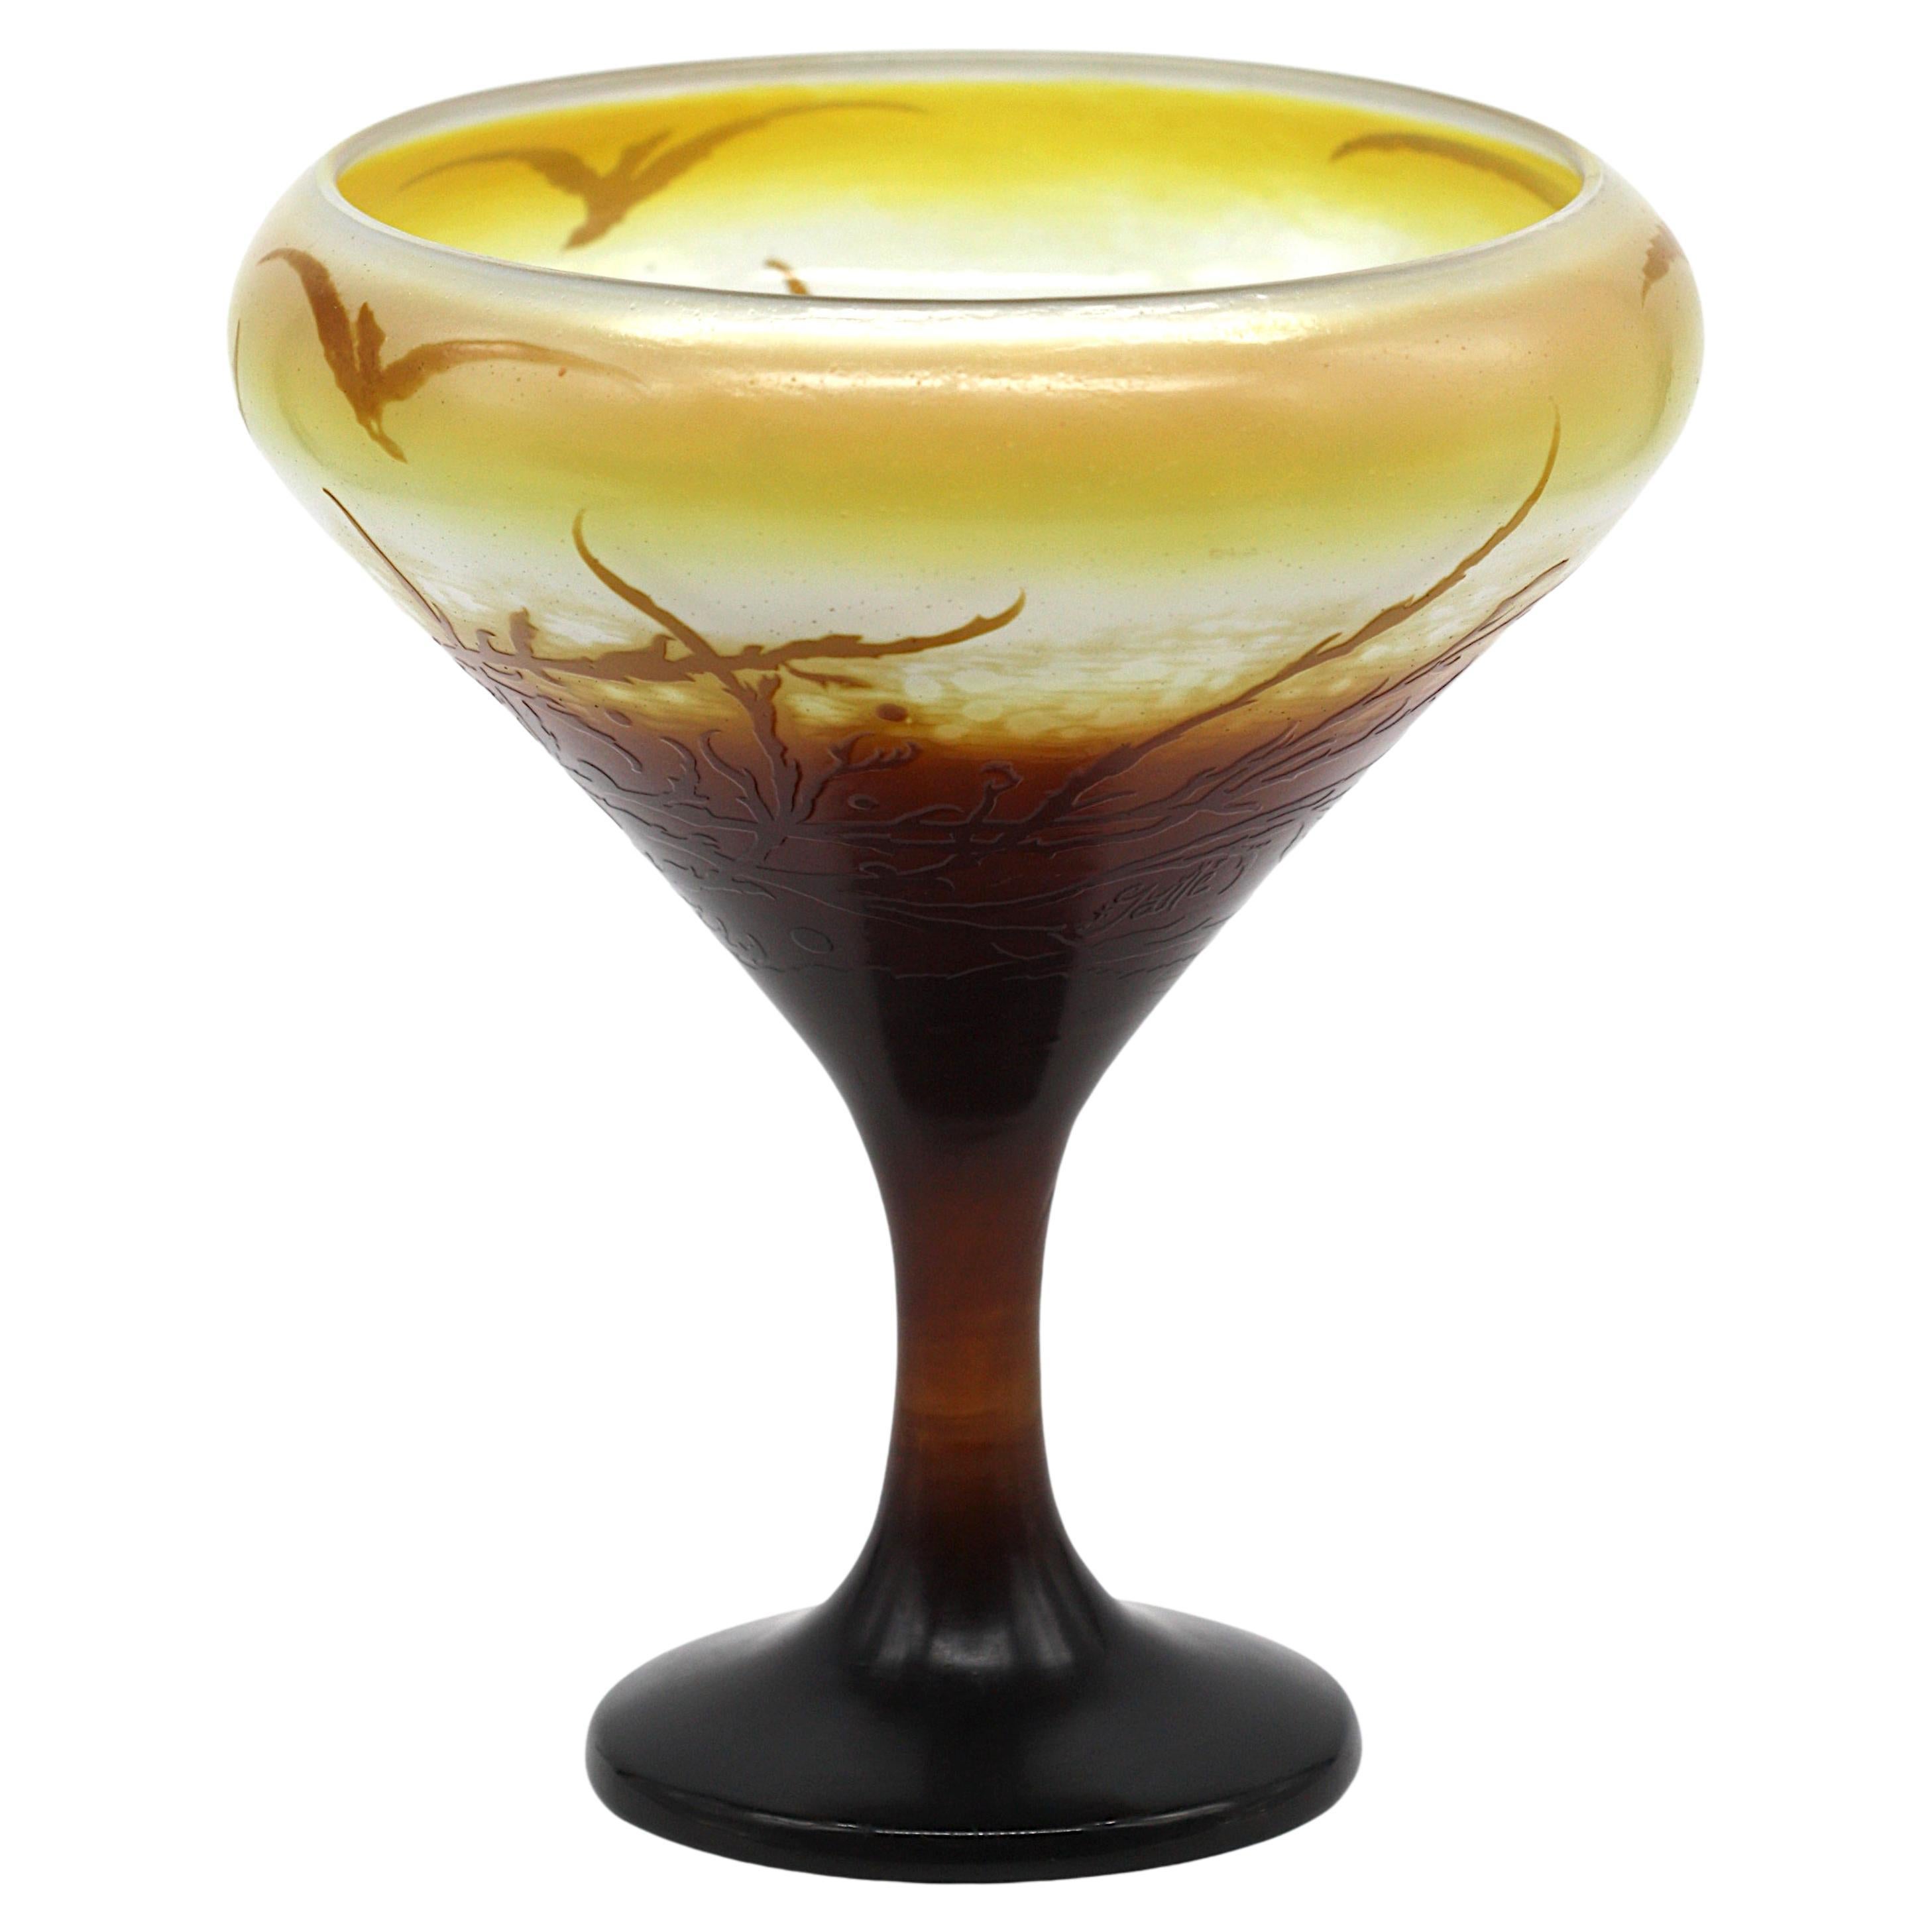 Fire-Polished Overlaid Cameo Glass Vase with Seagull Decoration For Sale